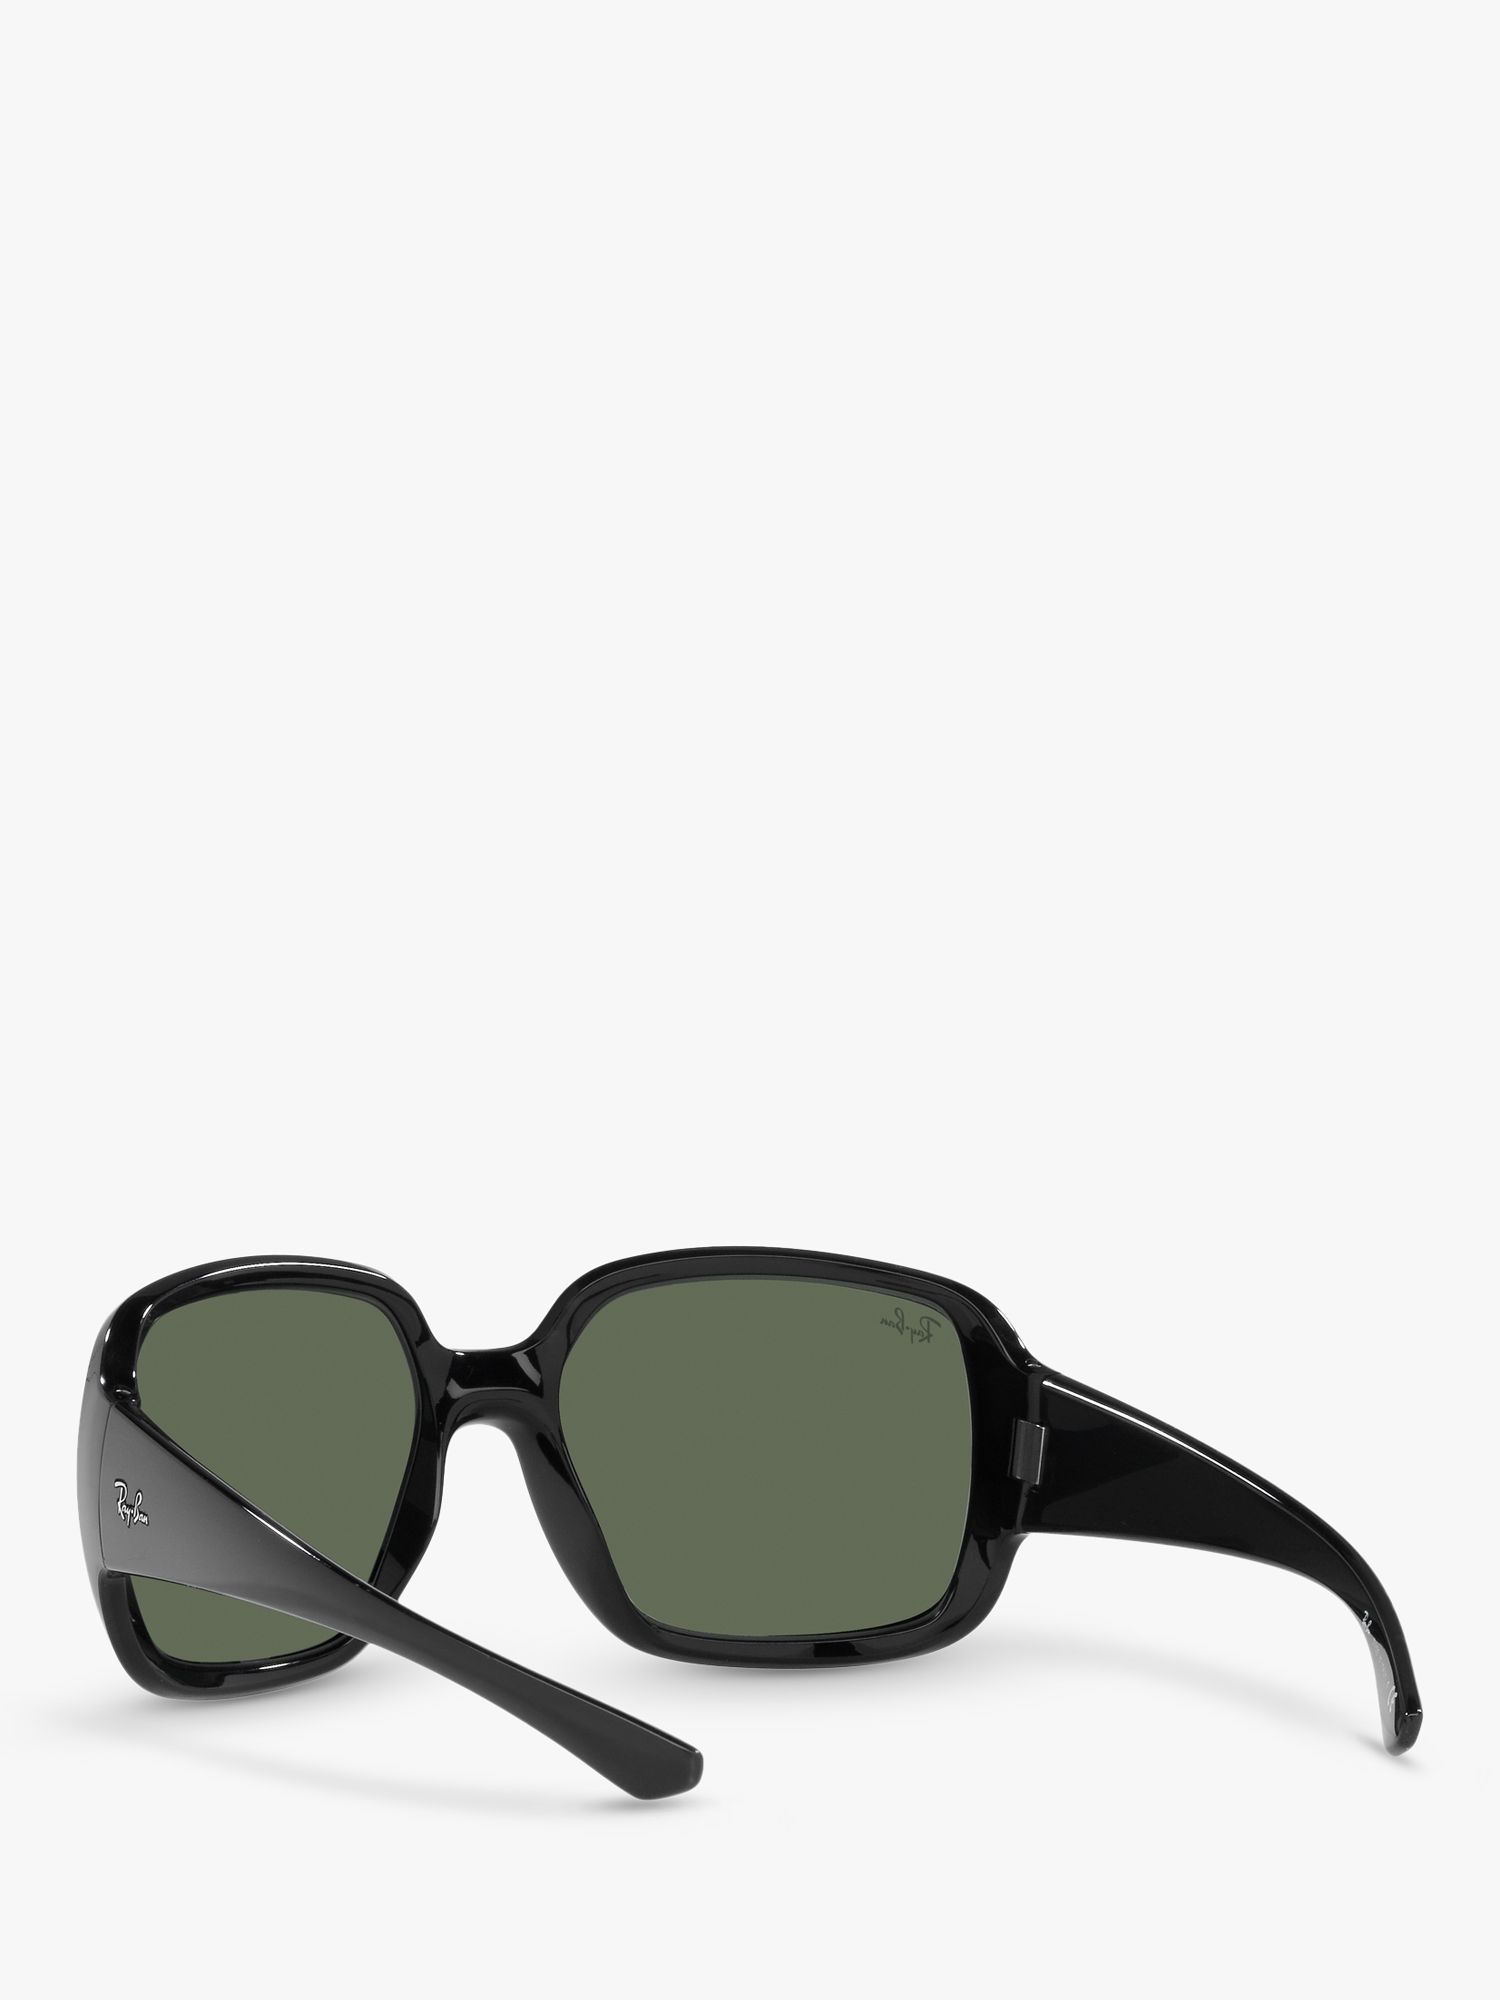 Ray-Ban RB4347 Unisex Square Sunglasses, Black/Green Classic at John Lewis  & Partners